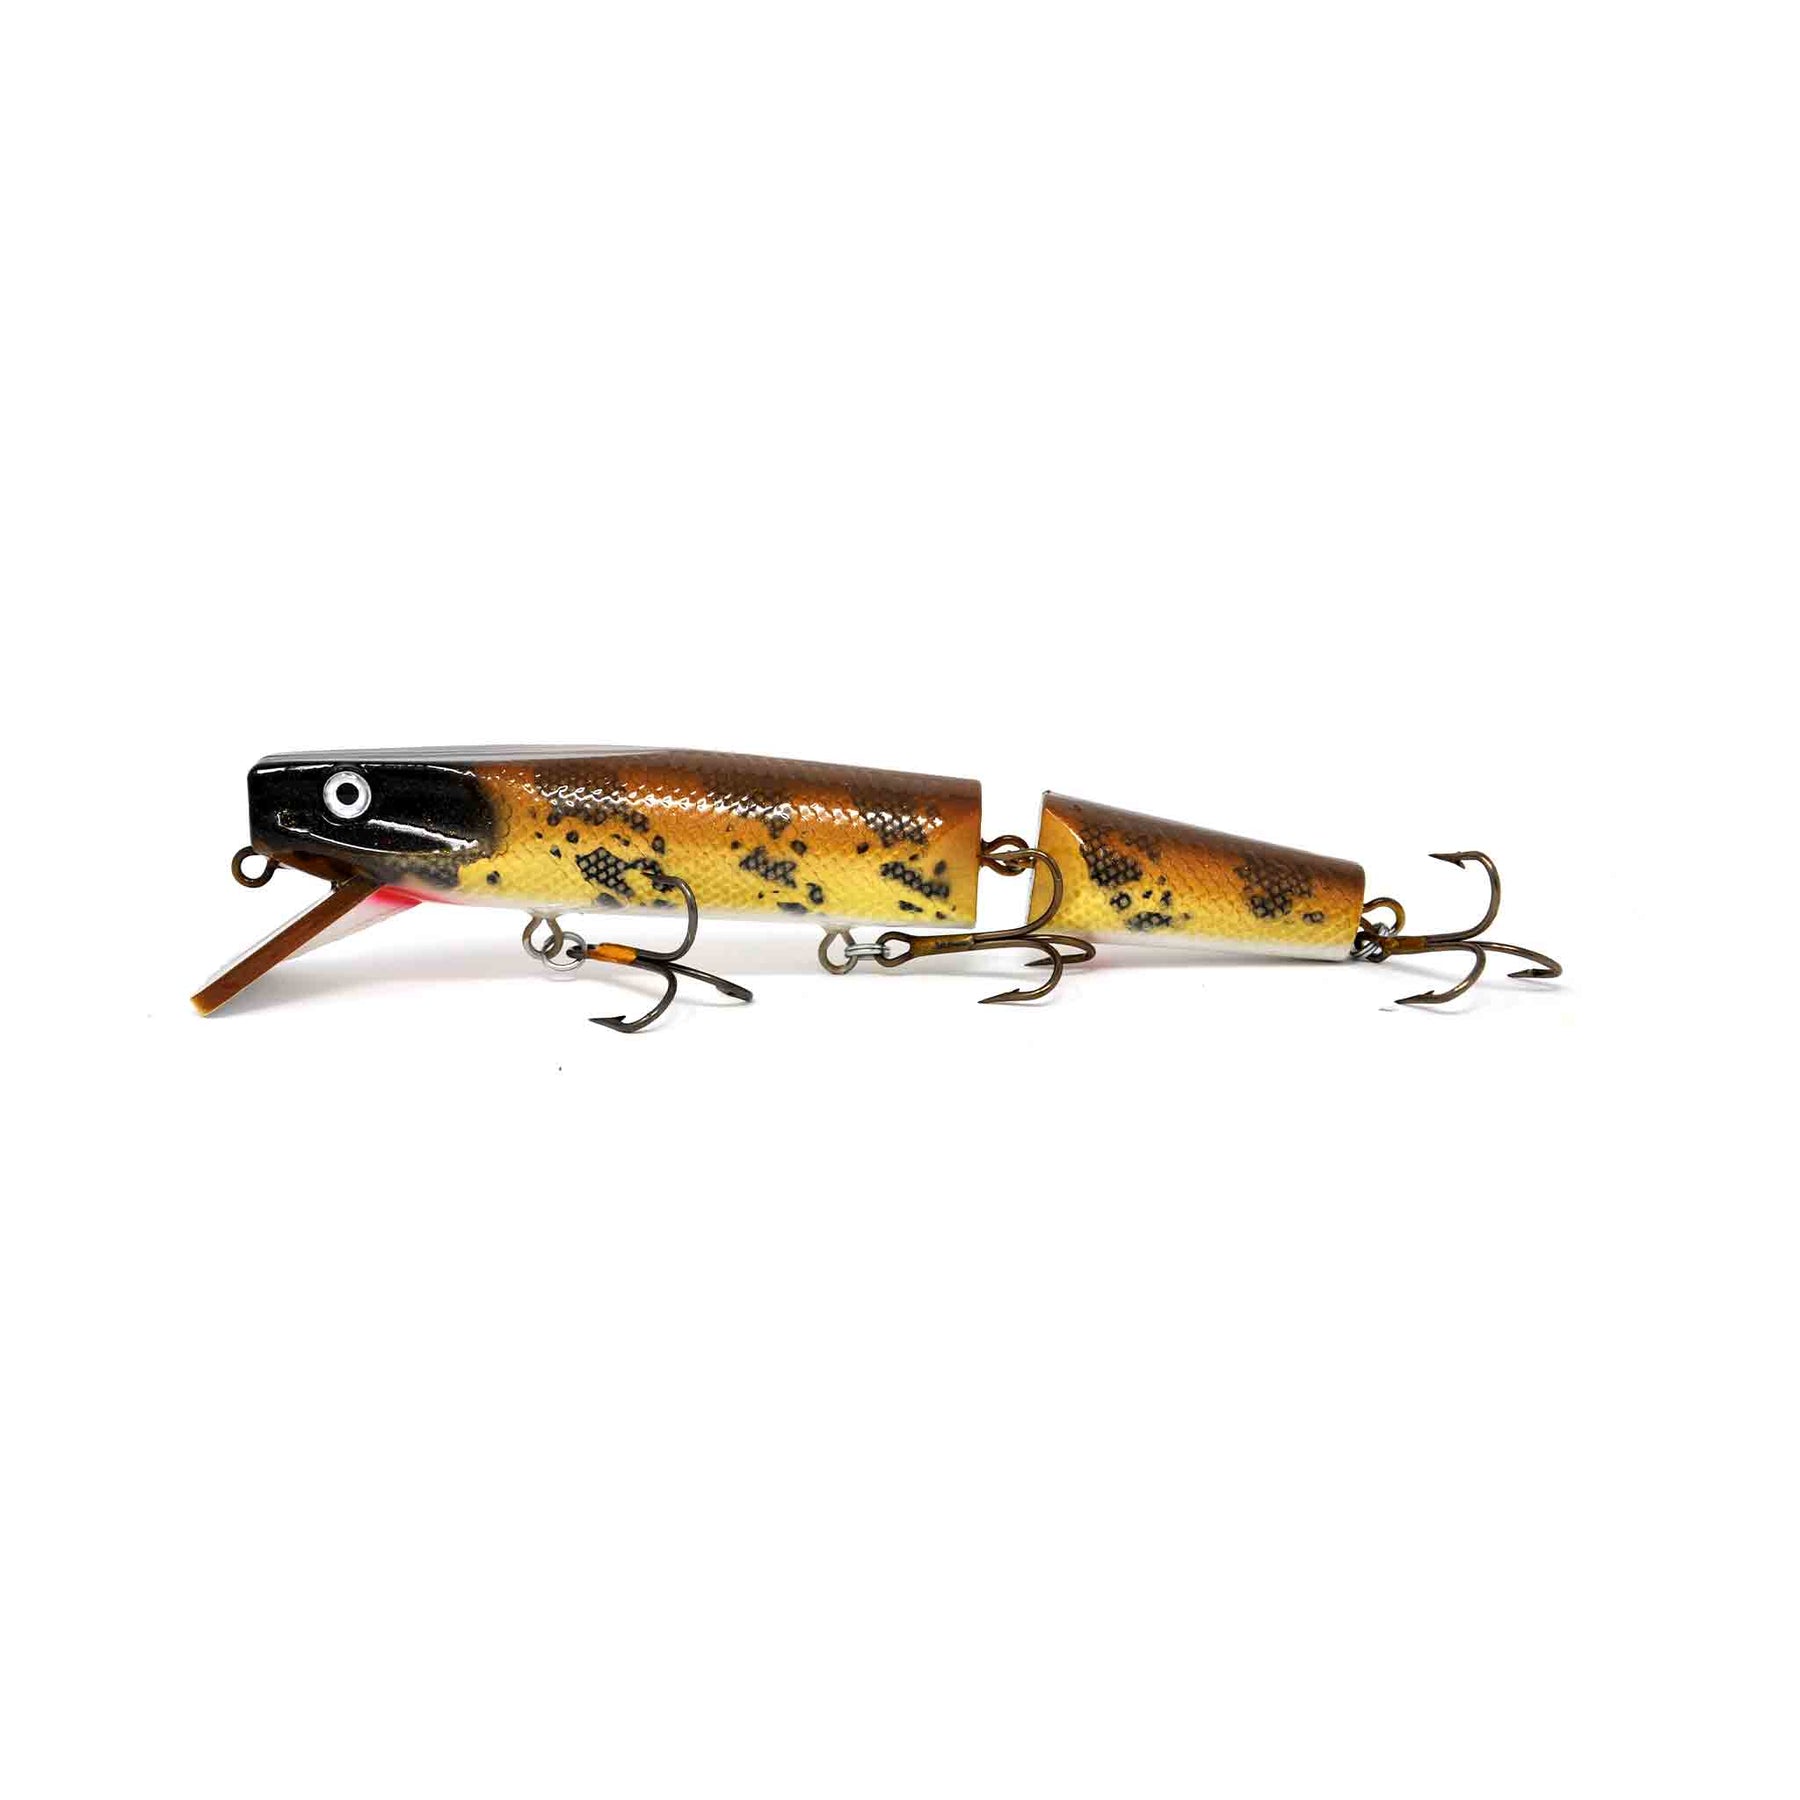 Drifter Tackle Muskie Stalker 10 Jointed / Perch